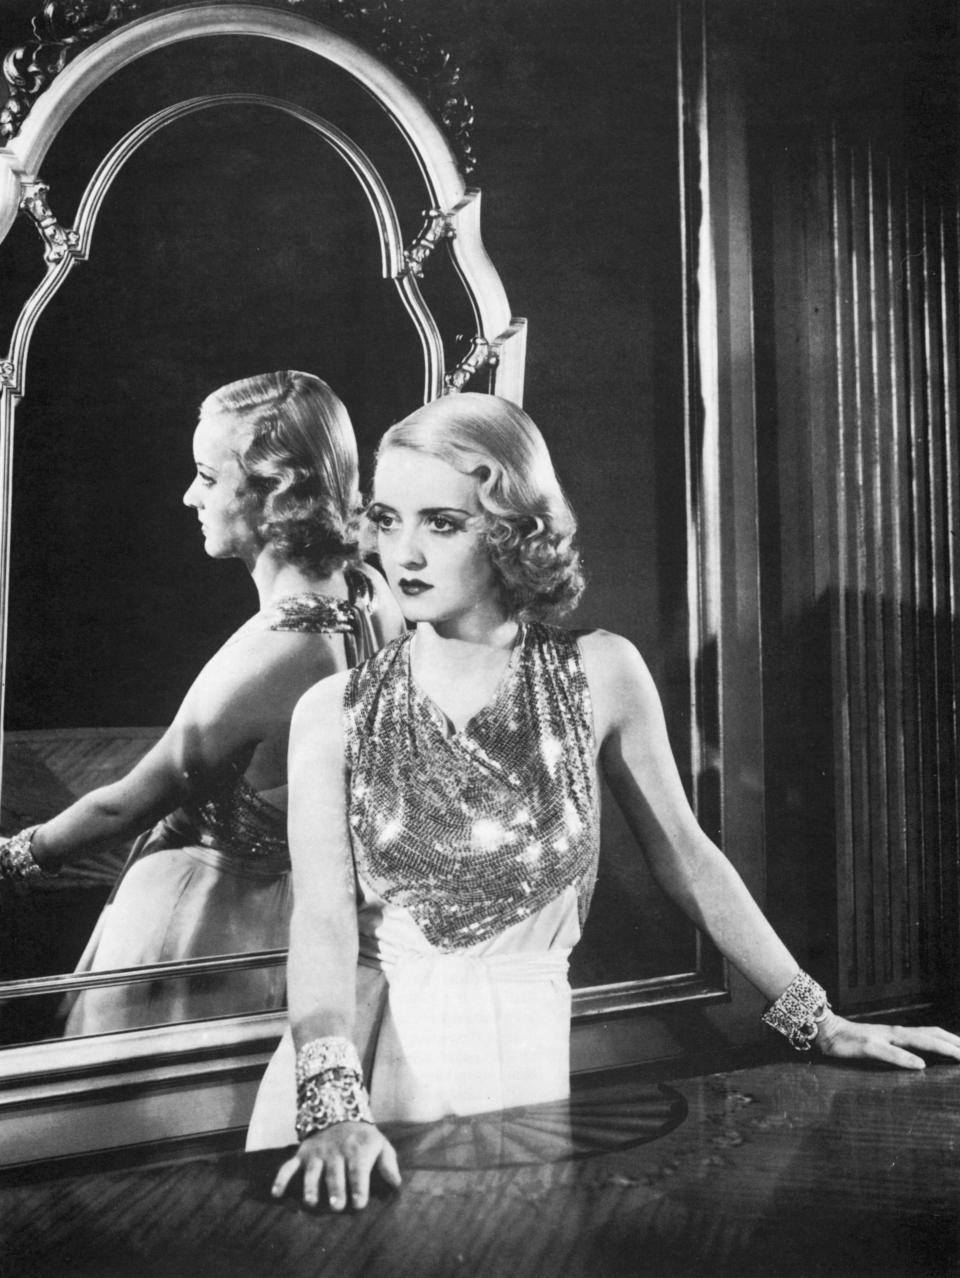 Bette Davis en "The Rich Are Always With Us", 1932 (Getty Images)